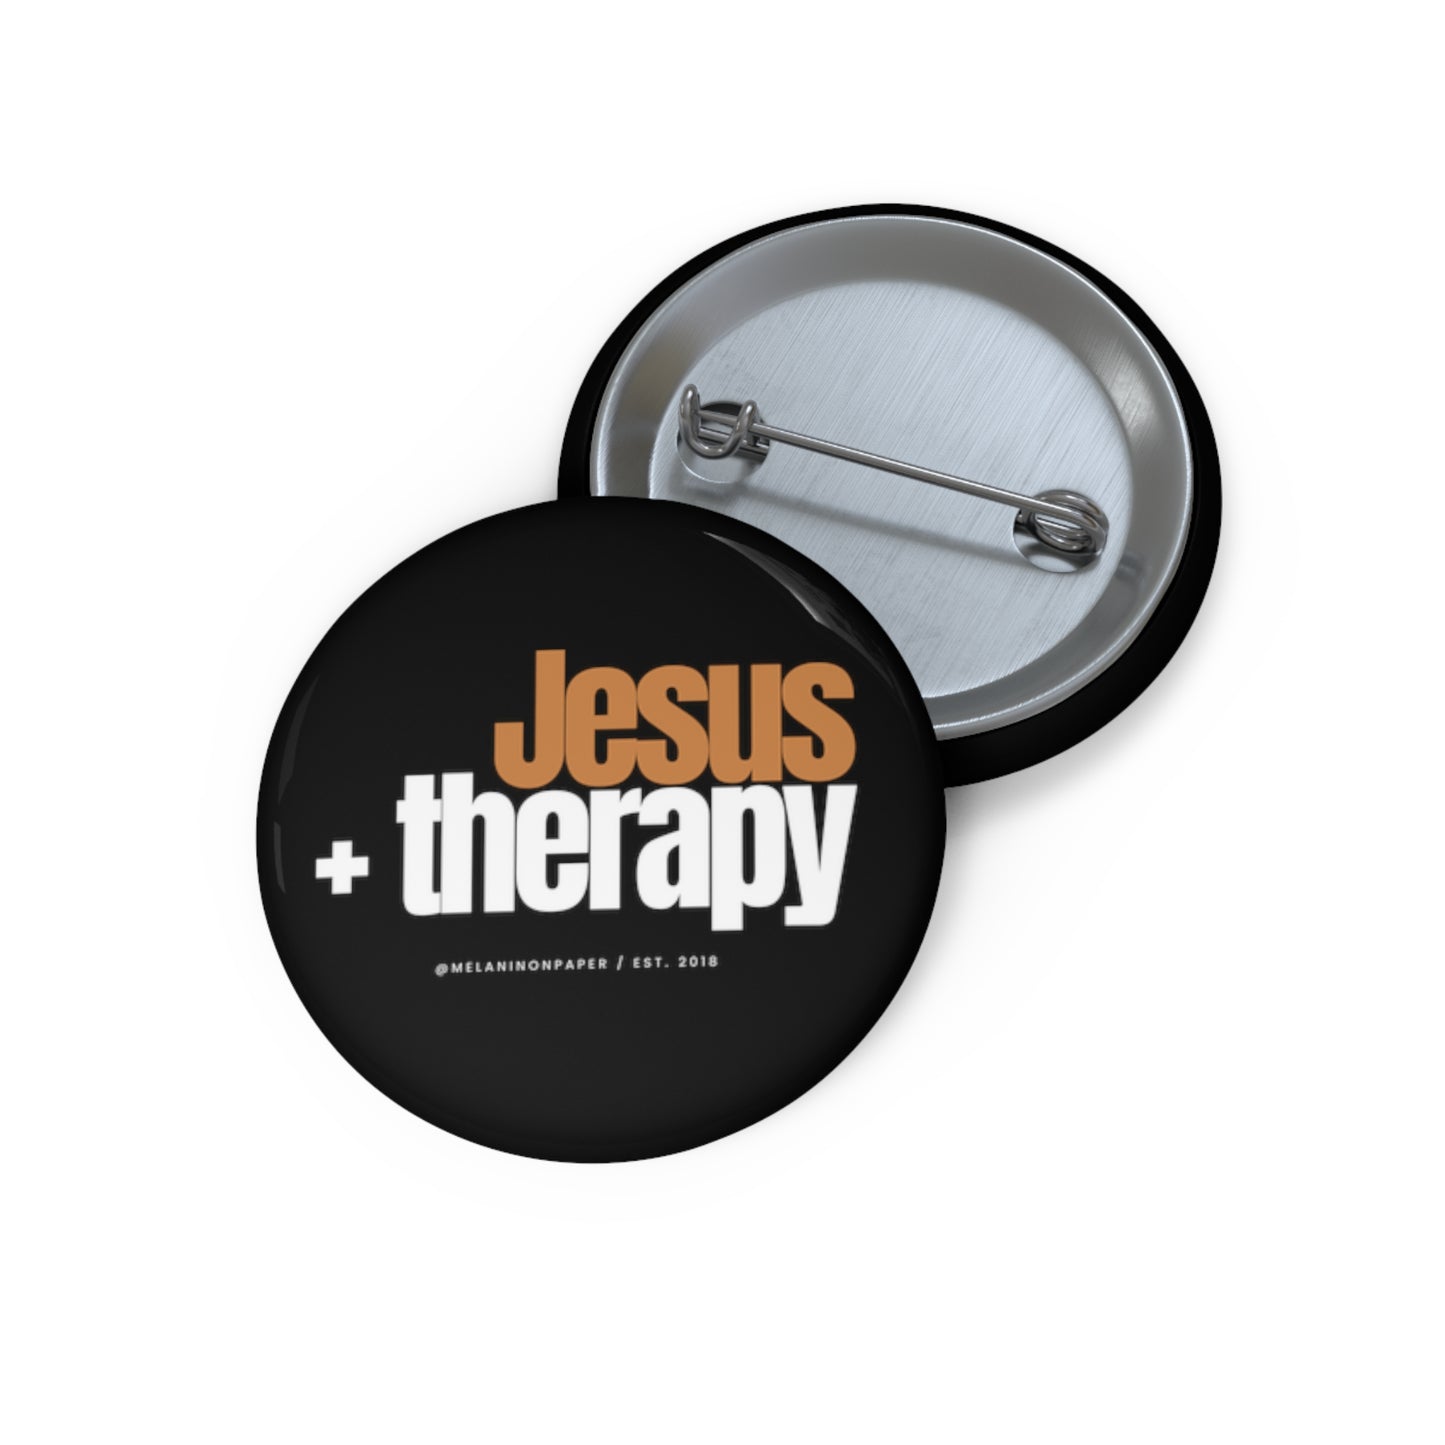 "Jesus + therapy" Pin Button - white & gold